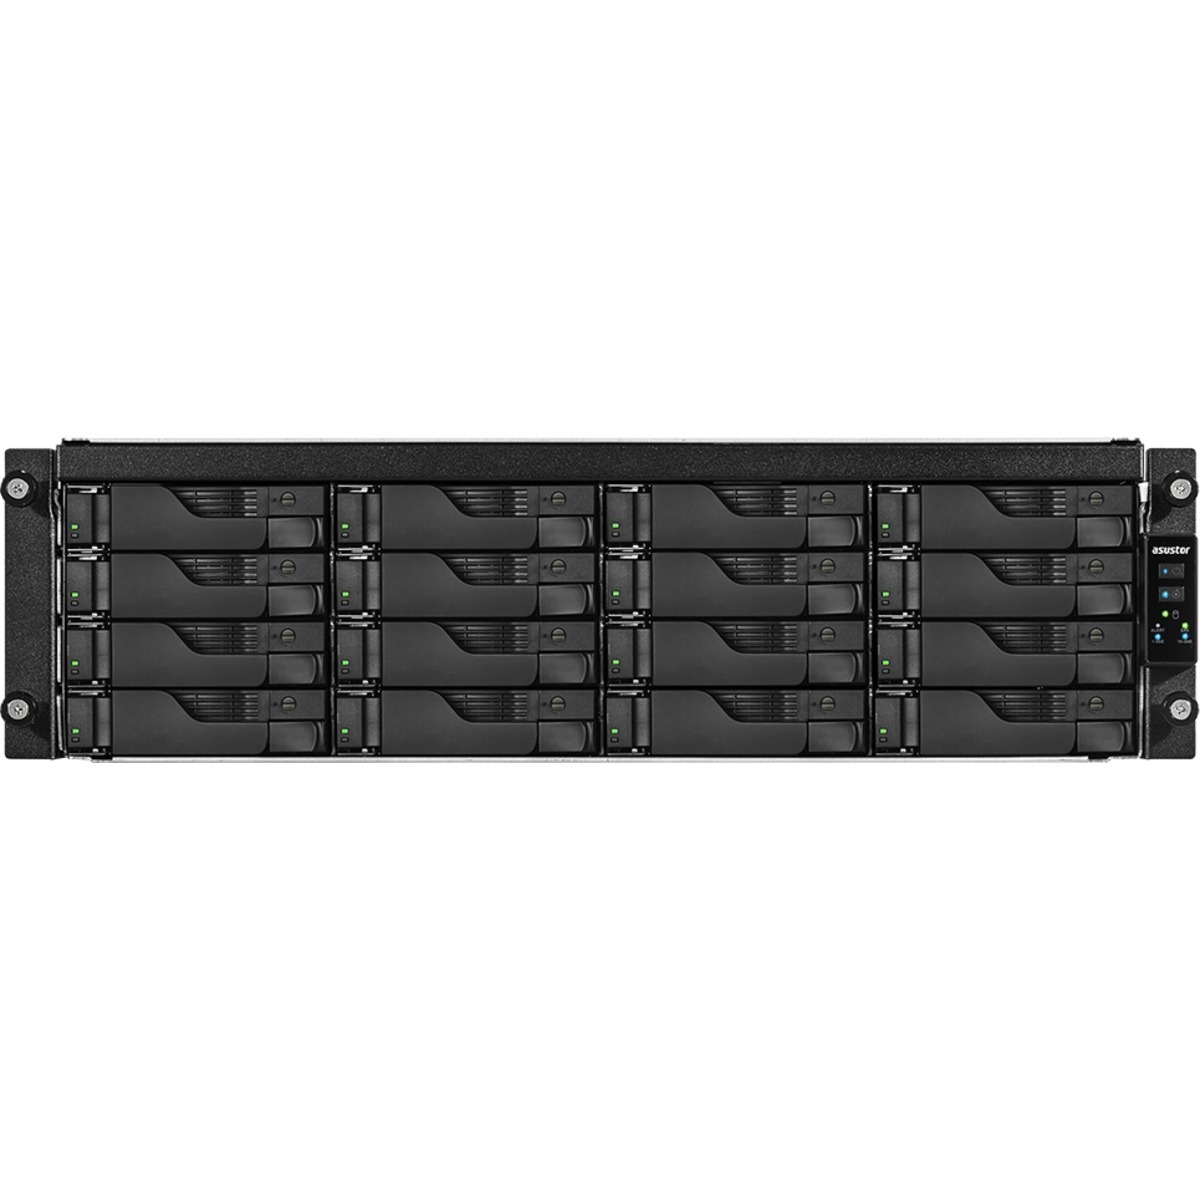 buy $20344 ASUSTOR AS7116RDX Lockerstor 16R Pro 128tb RackMount NAS - Network Attached Storage Device 16x8000gb Samsung 870 QVO MZ-77Q8T0 2.5 SATA 6Gb/s SSD CONSUMER Class Drives Installed - Burn-In Tested - nas headquarters buy network attached storage server device das new raid-5 free shipping usa christmas new year holiday sale AS7116RDX Lockerstor 16R Pro